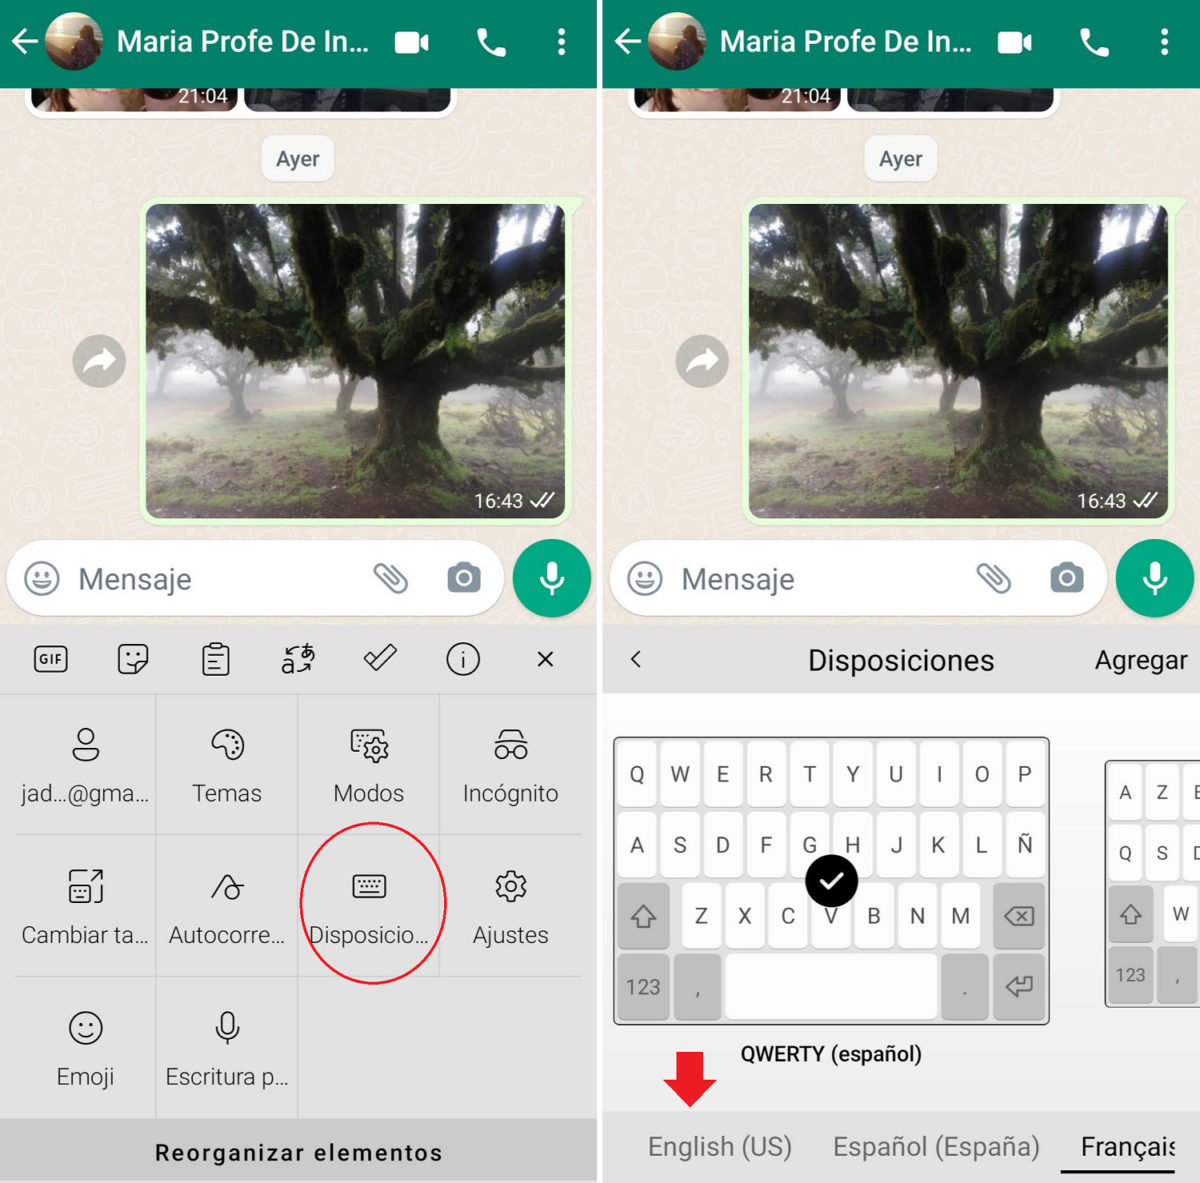 How to change the language on the WhatsApp keyboard